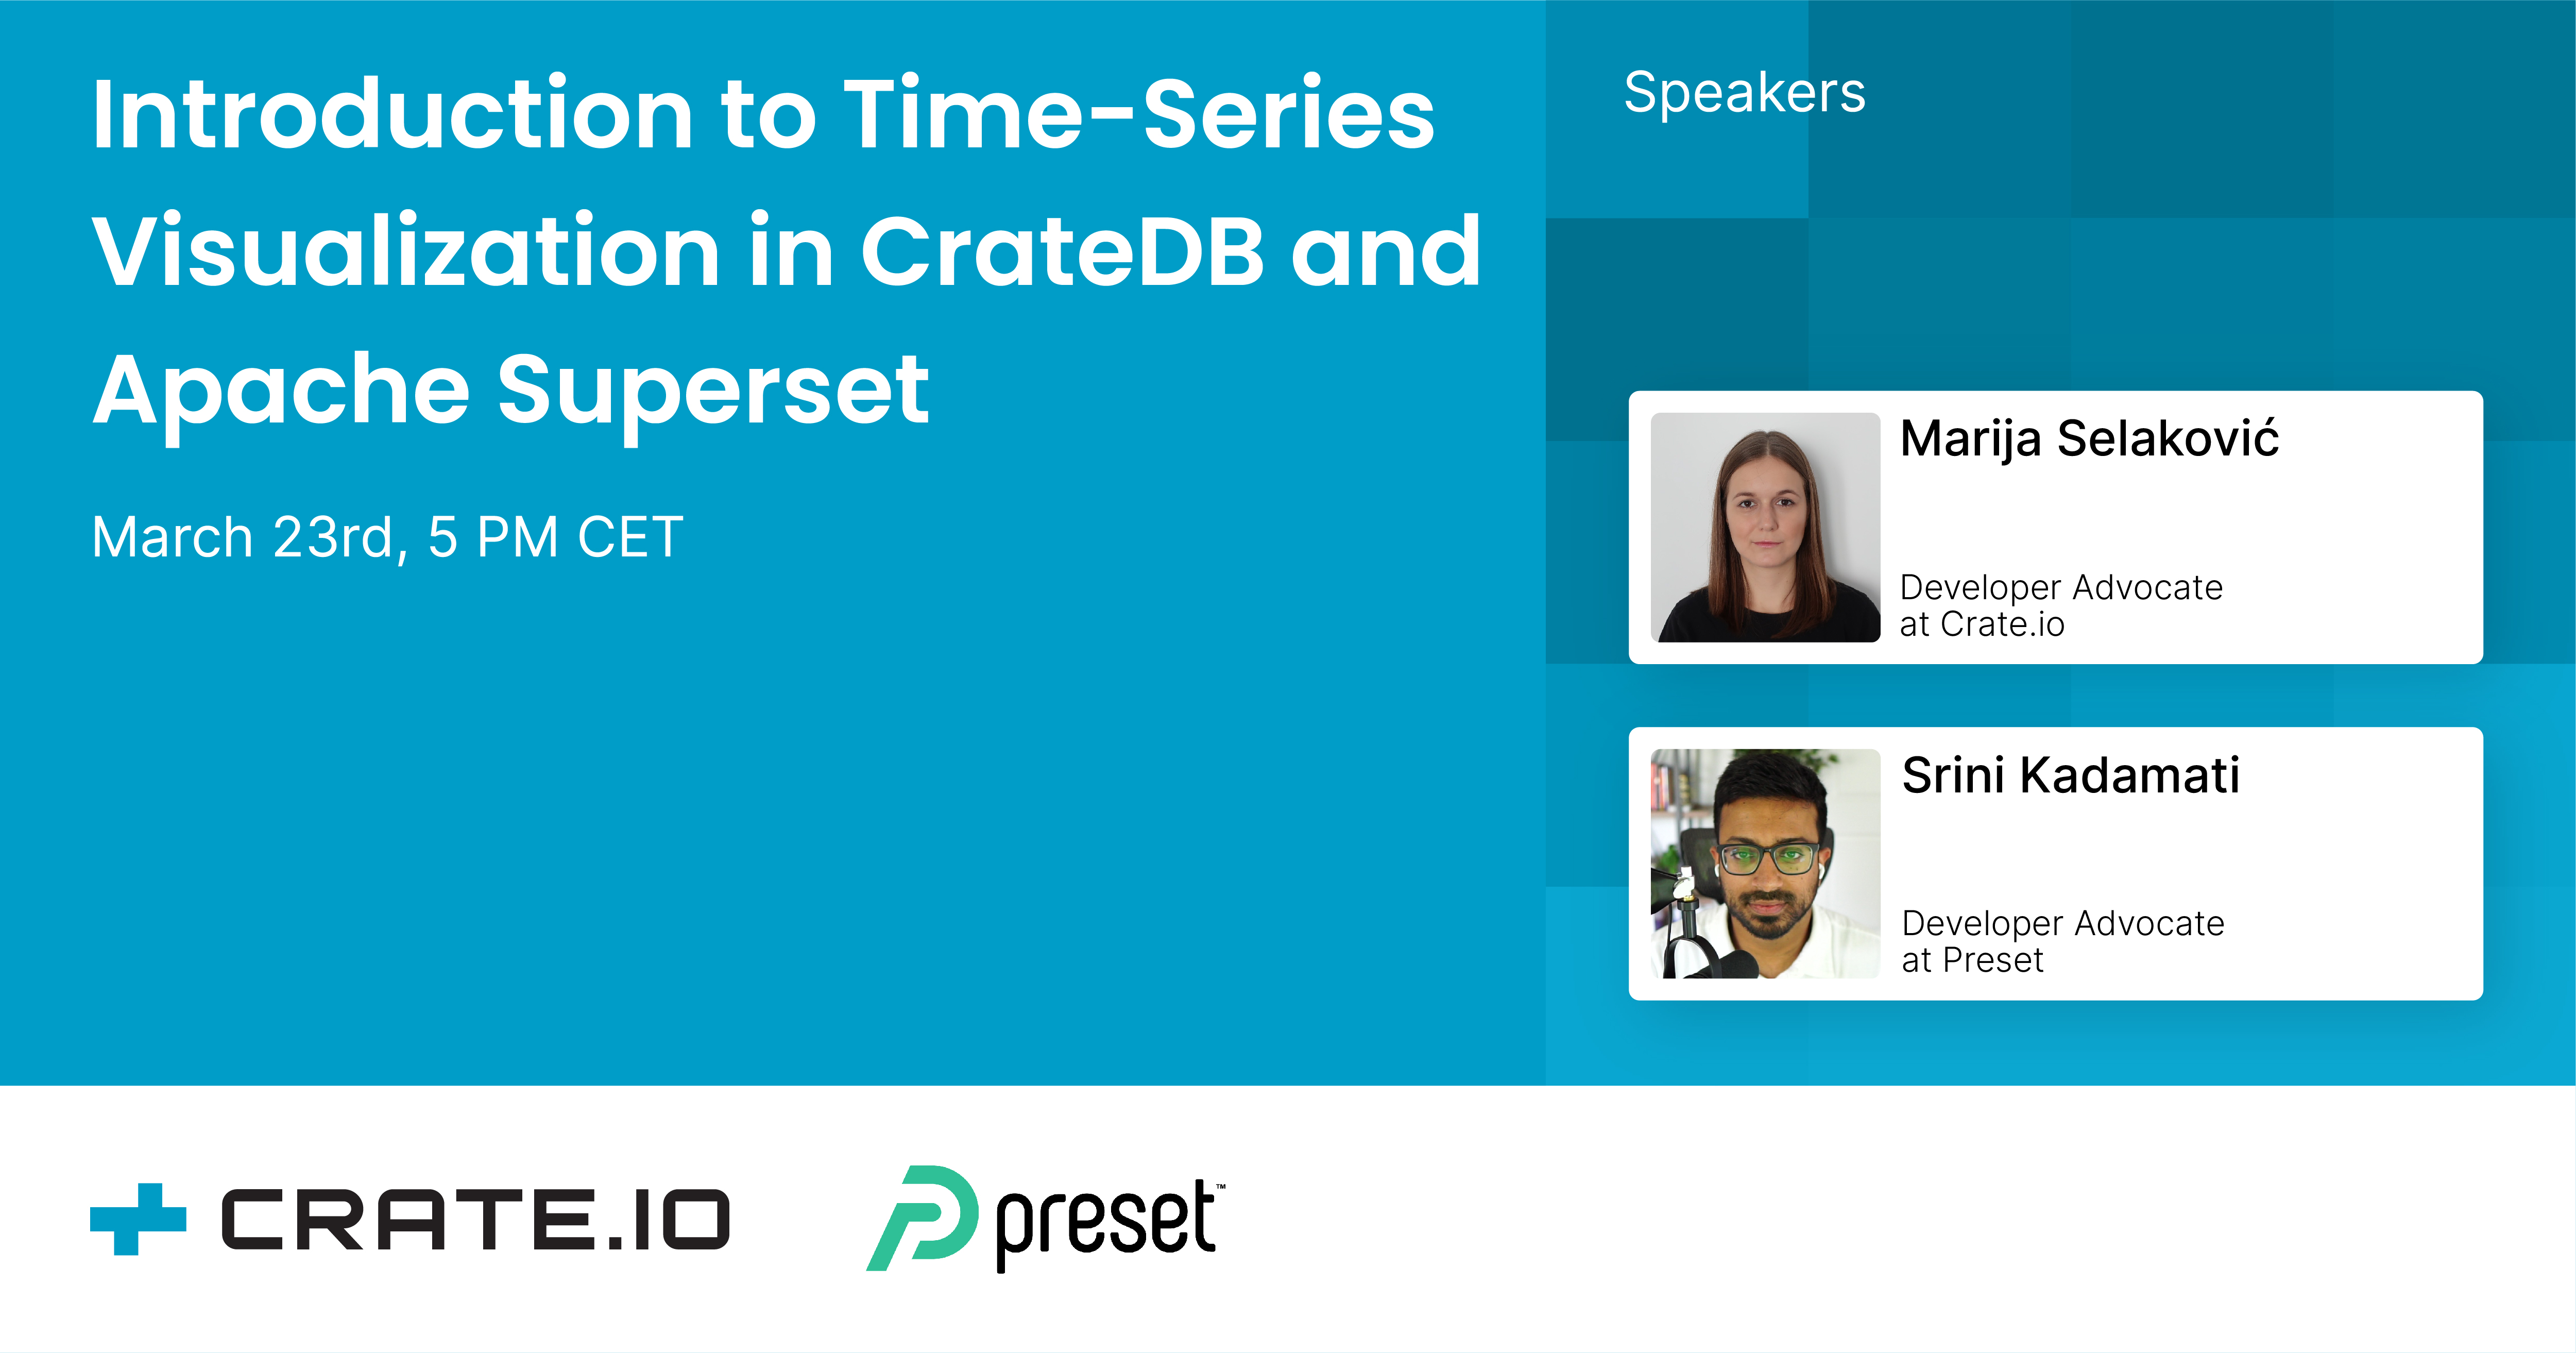 Introduction to Time-Series Visualization in CrateDB and Apache Superset